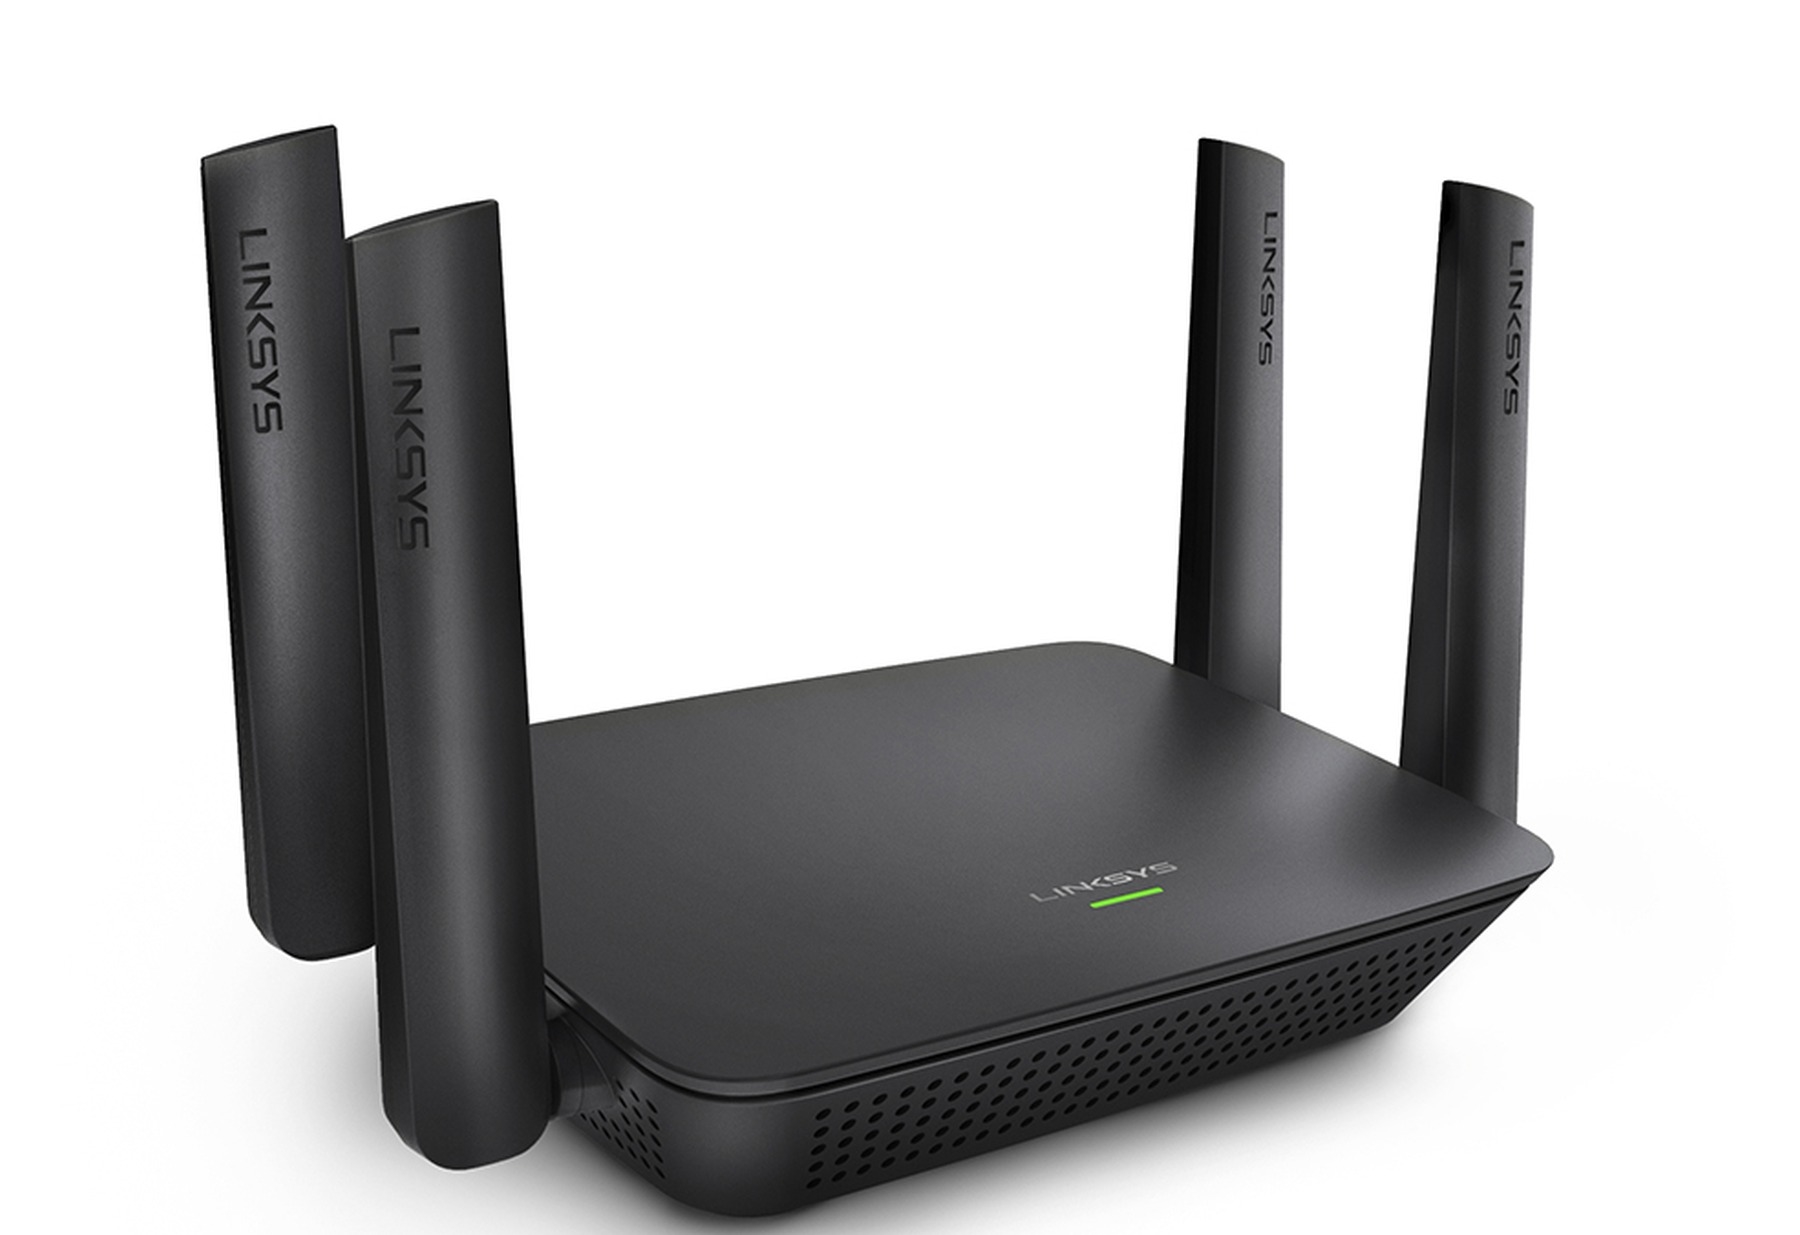 Linksys has a new tri-band range extender to eliminate WiFi dead spots | DeviceDaily.com